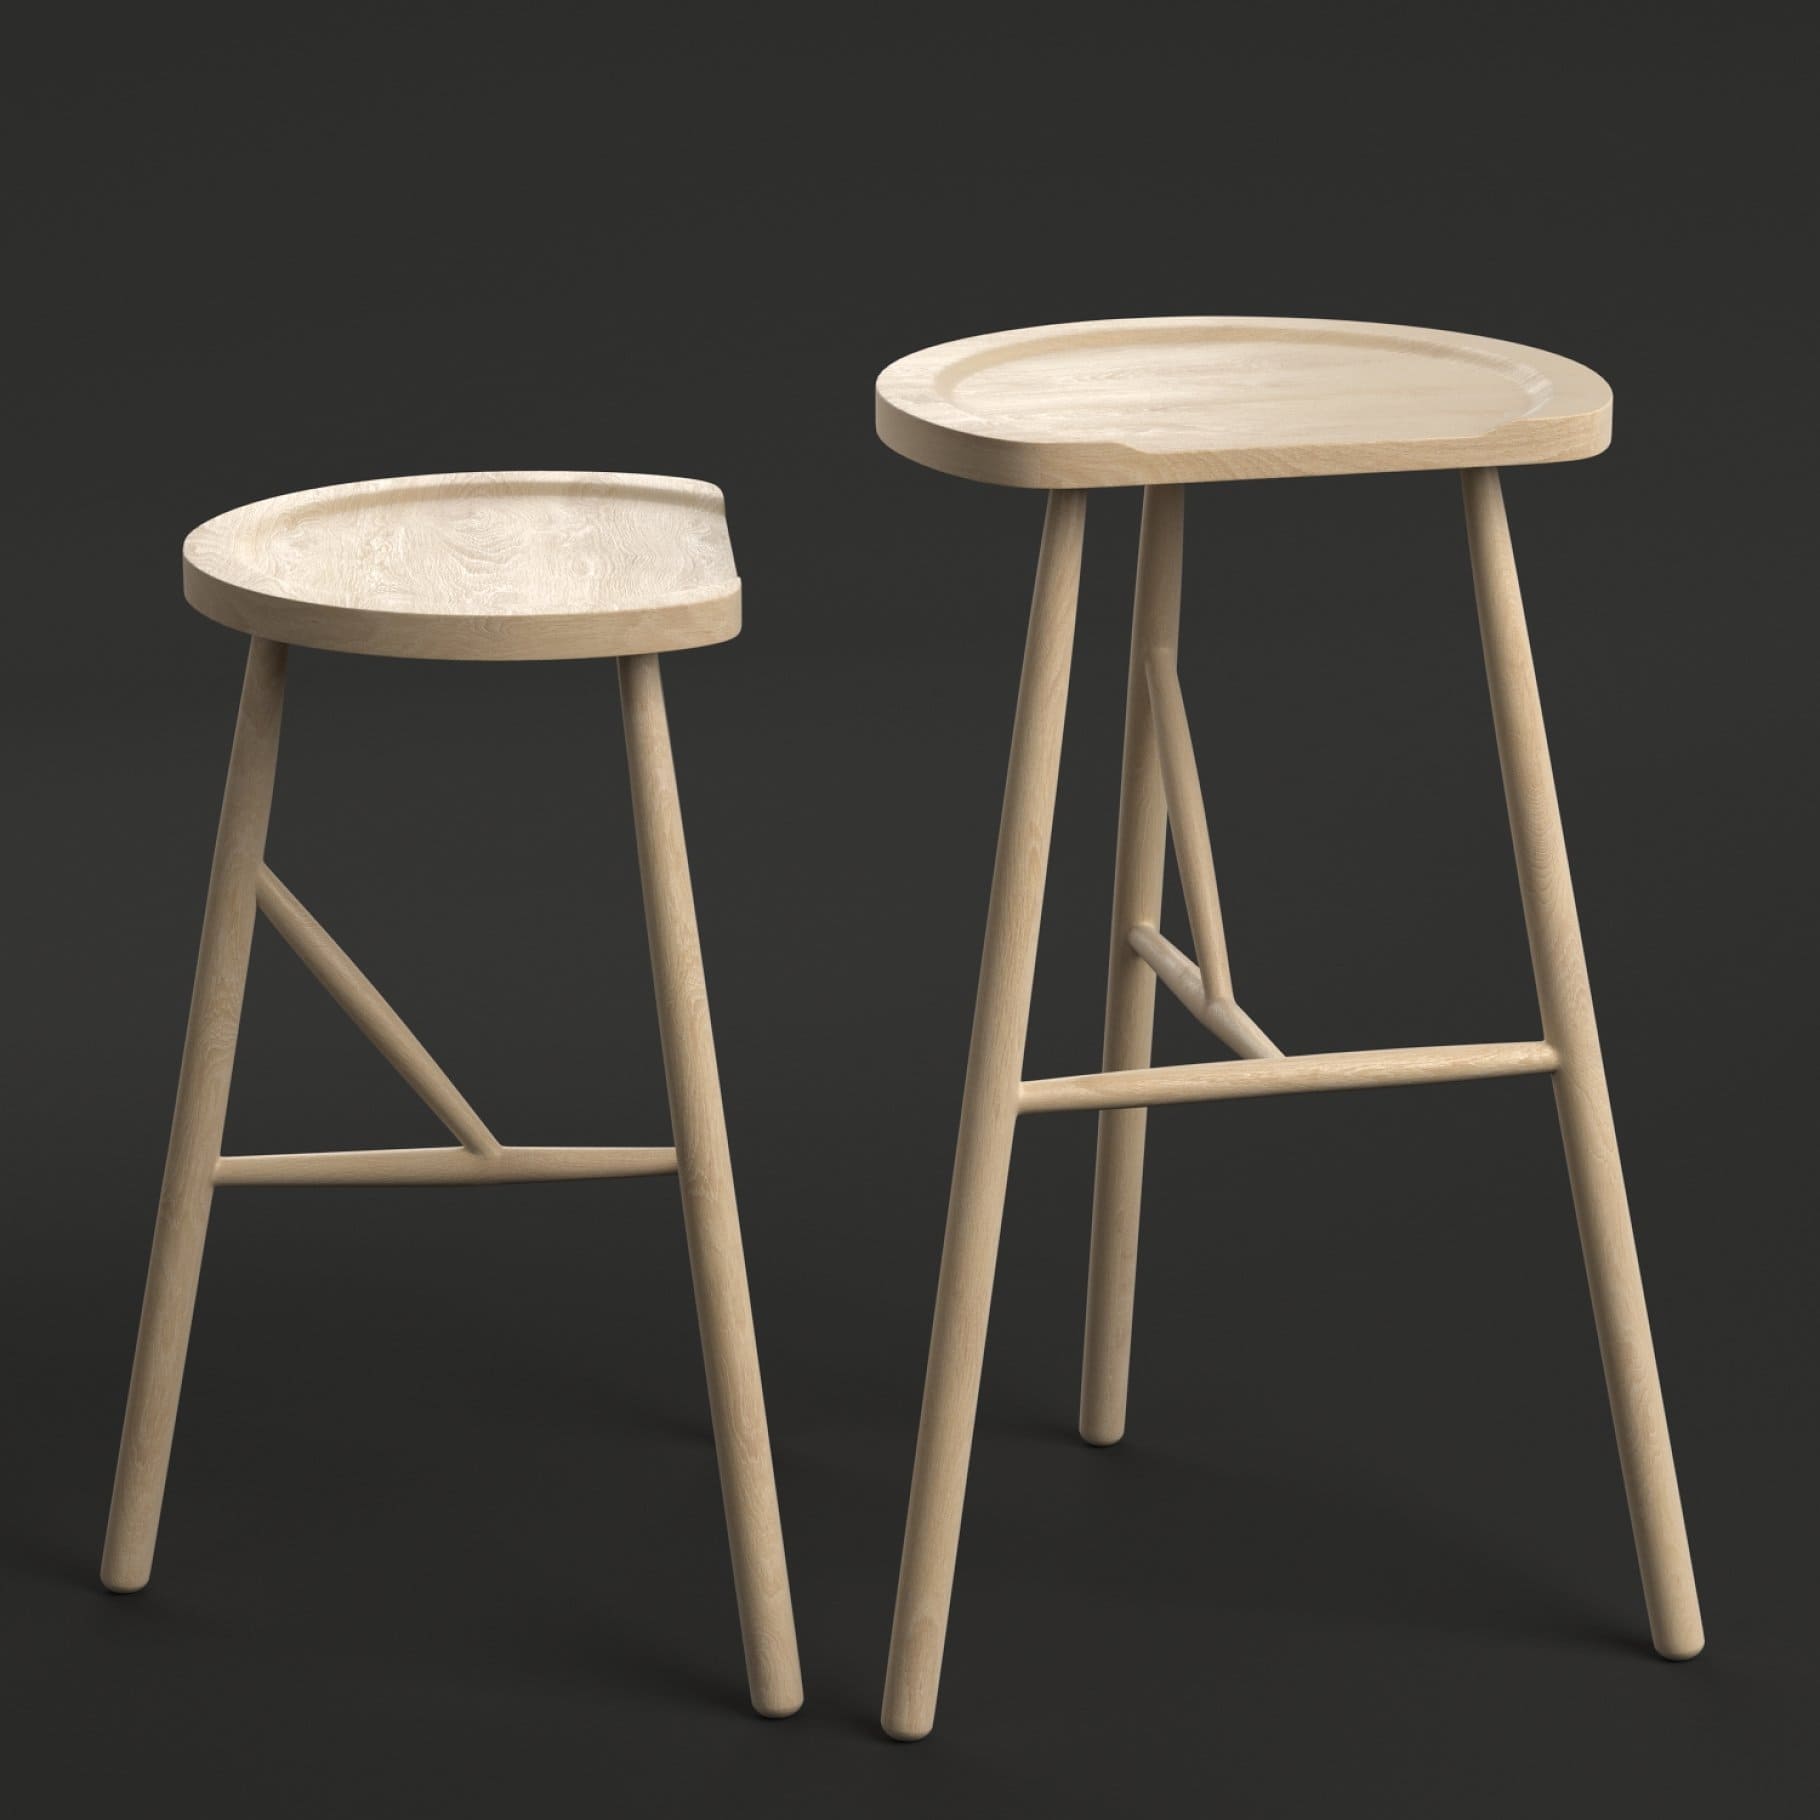 Two Puccio stools made of ash wood.